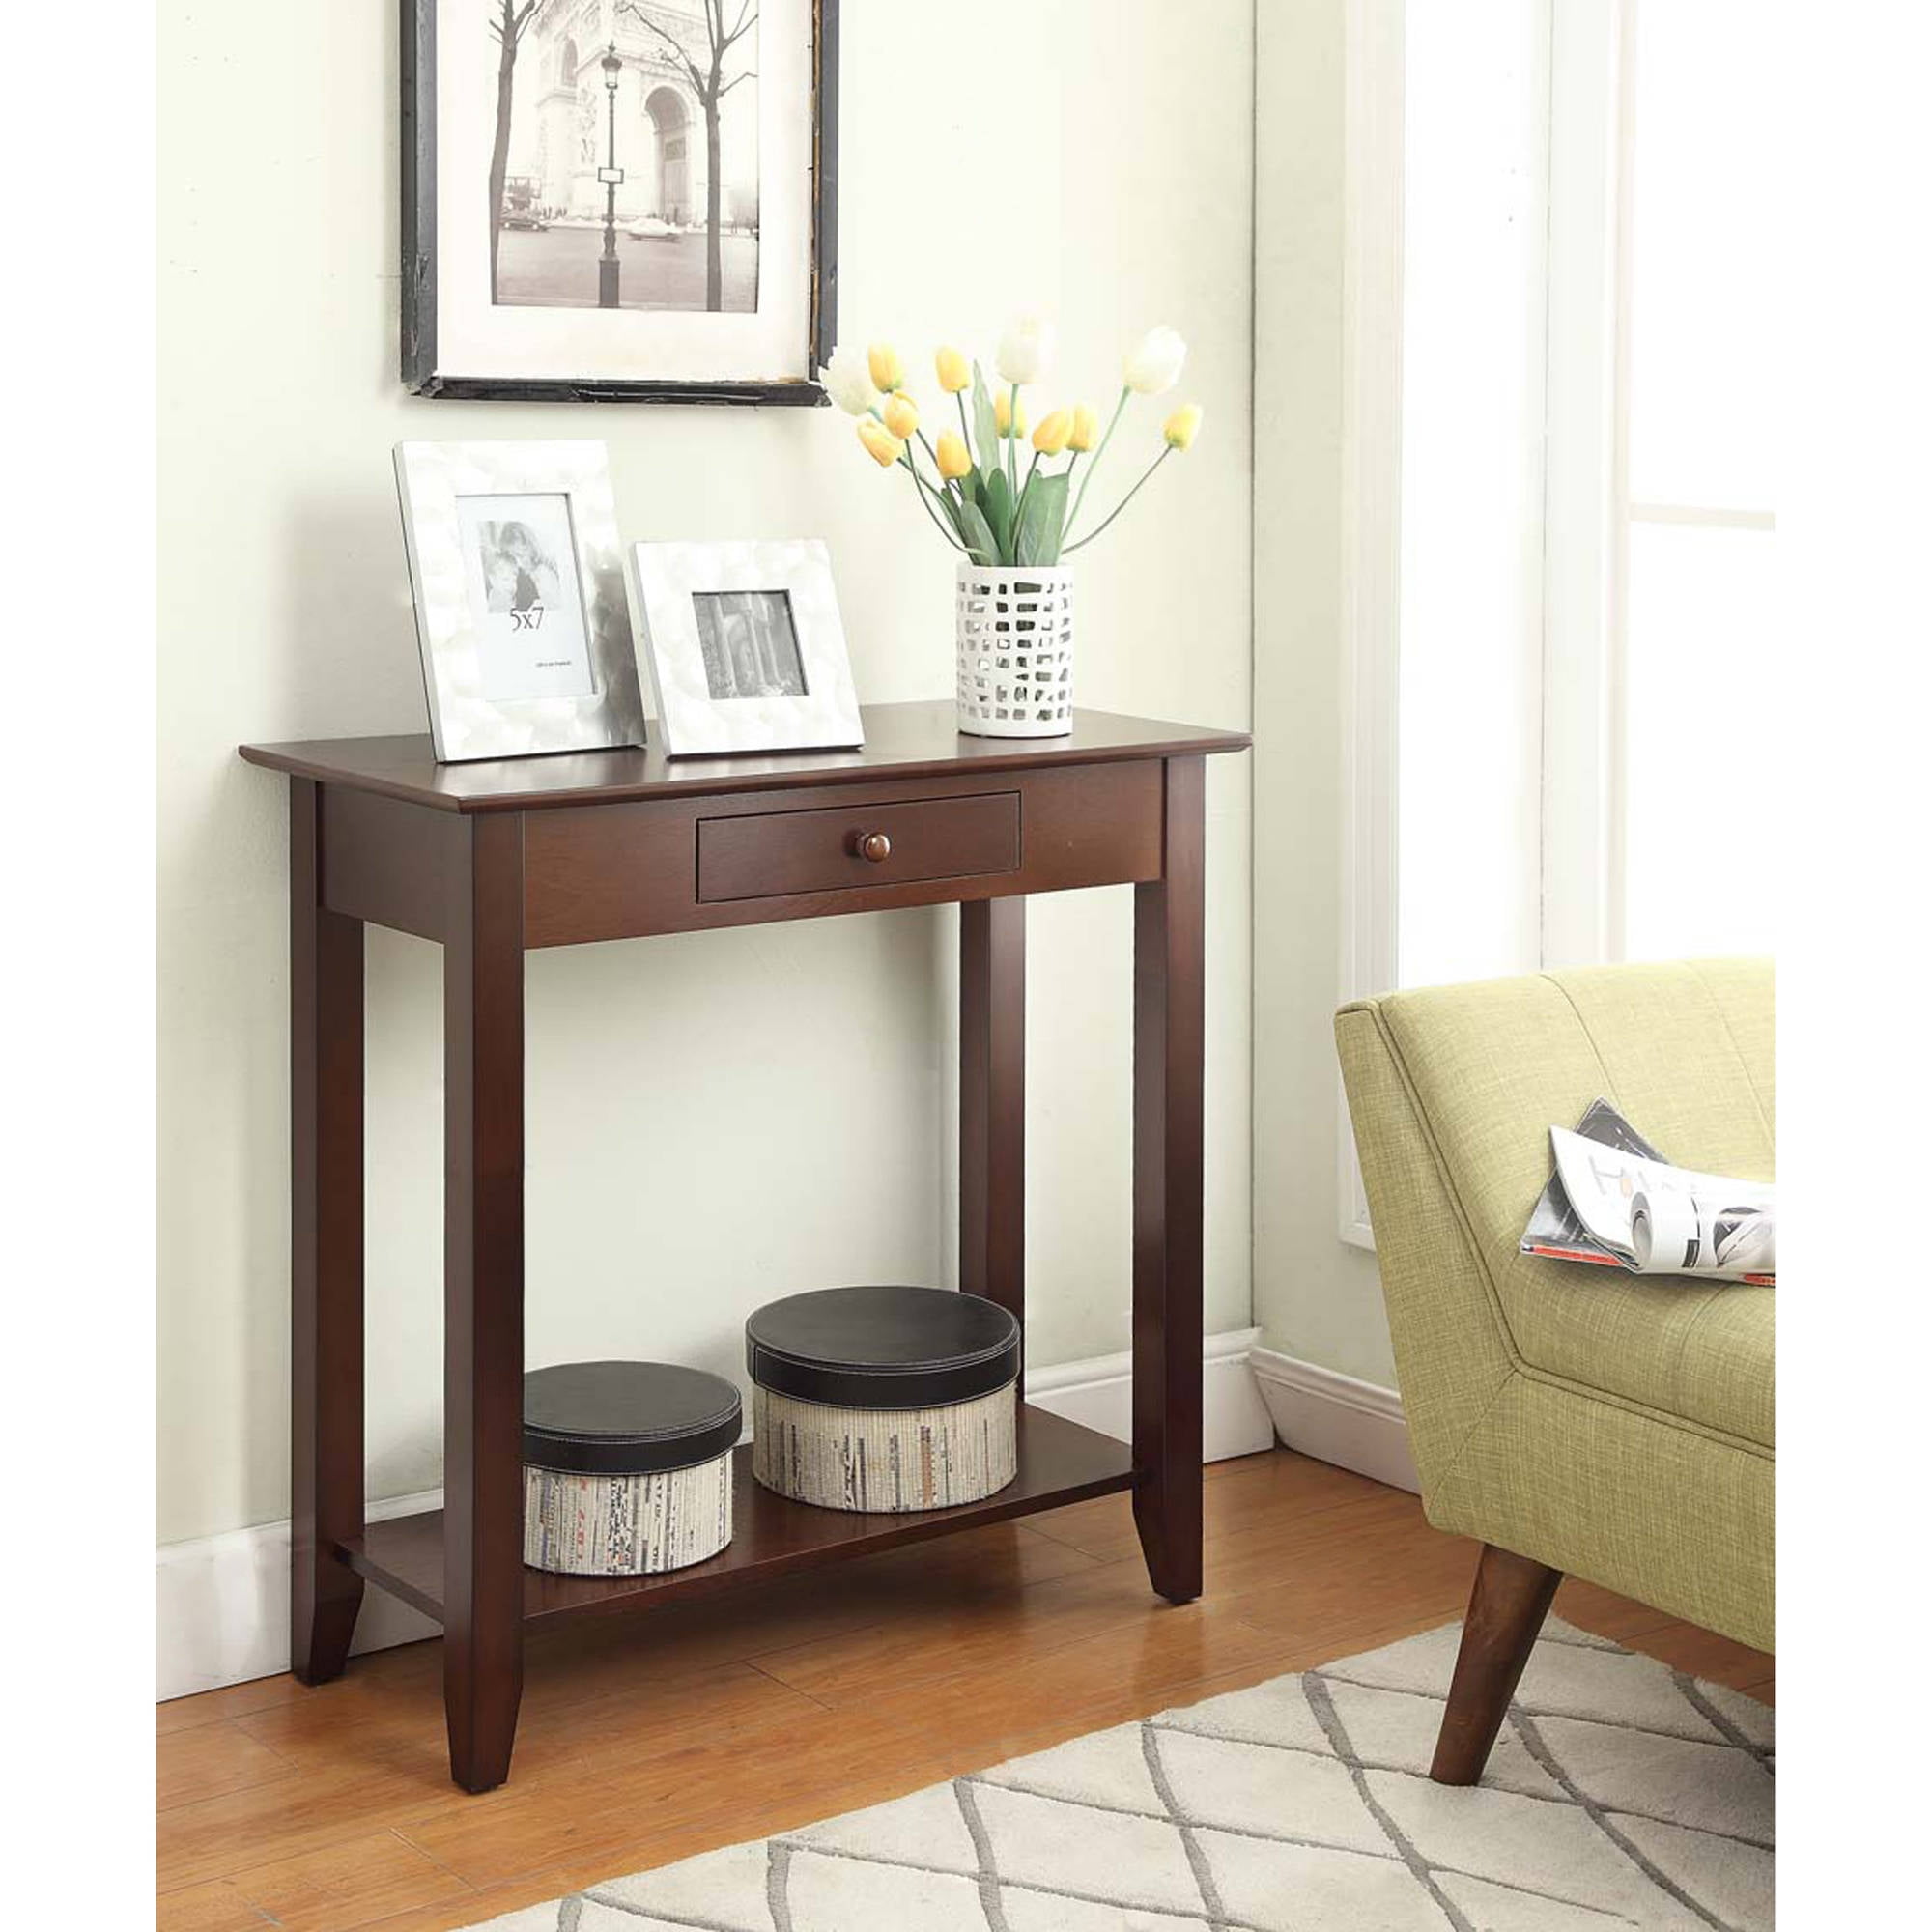 Convenience Concepts American Heritage Hall Table, Multiple Finishes - image 1 of 5